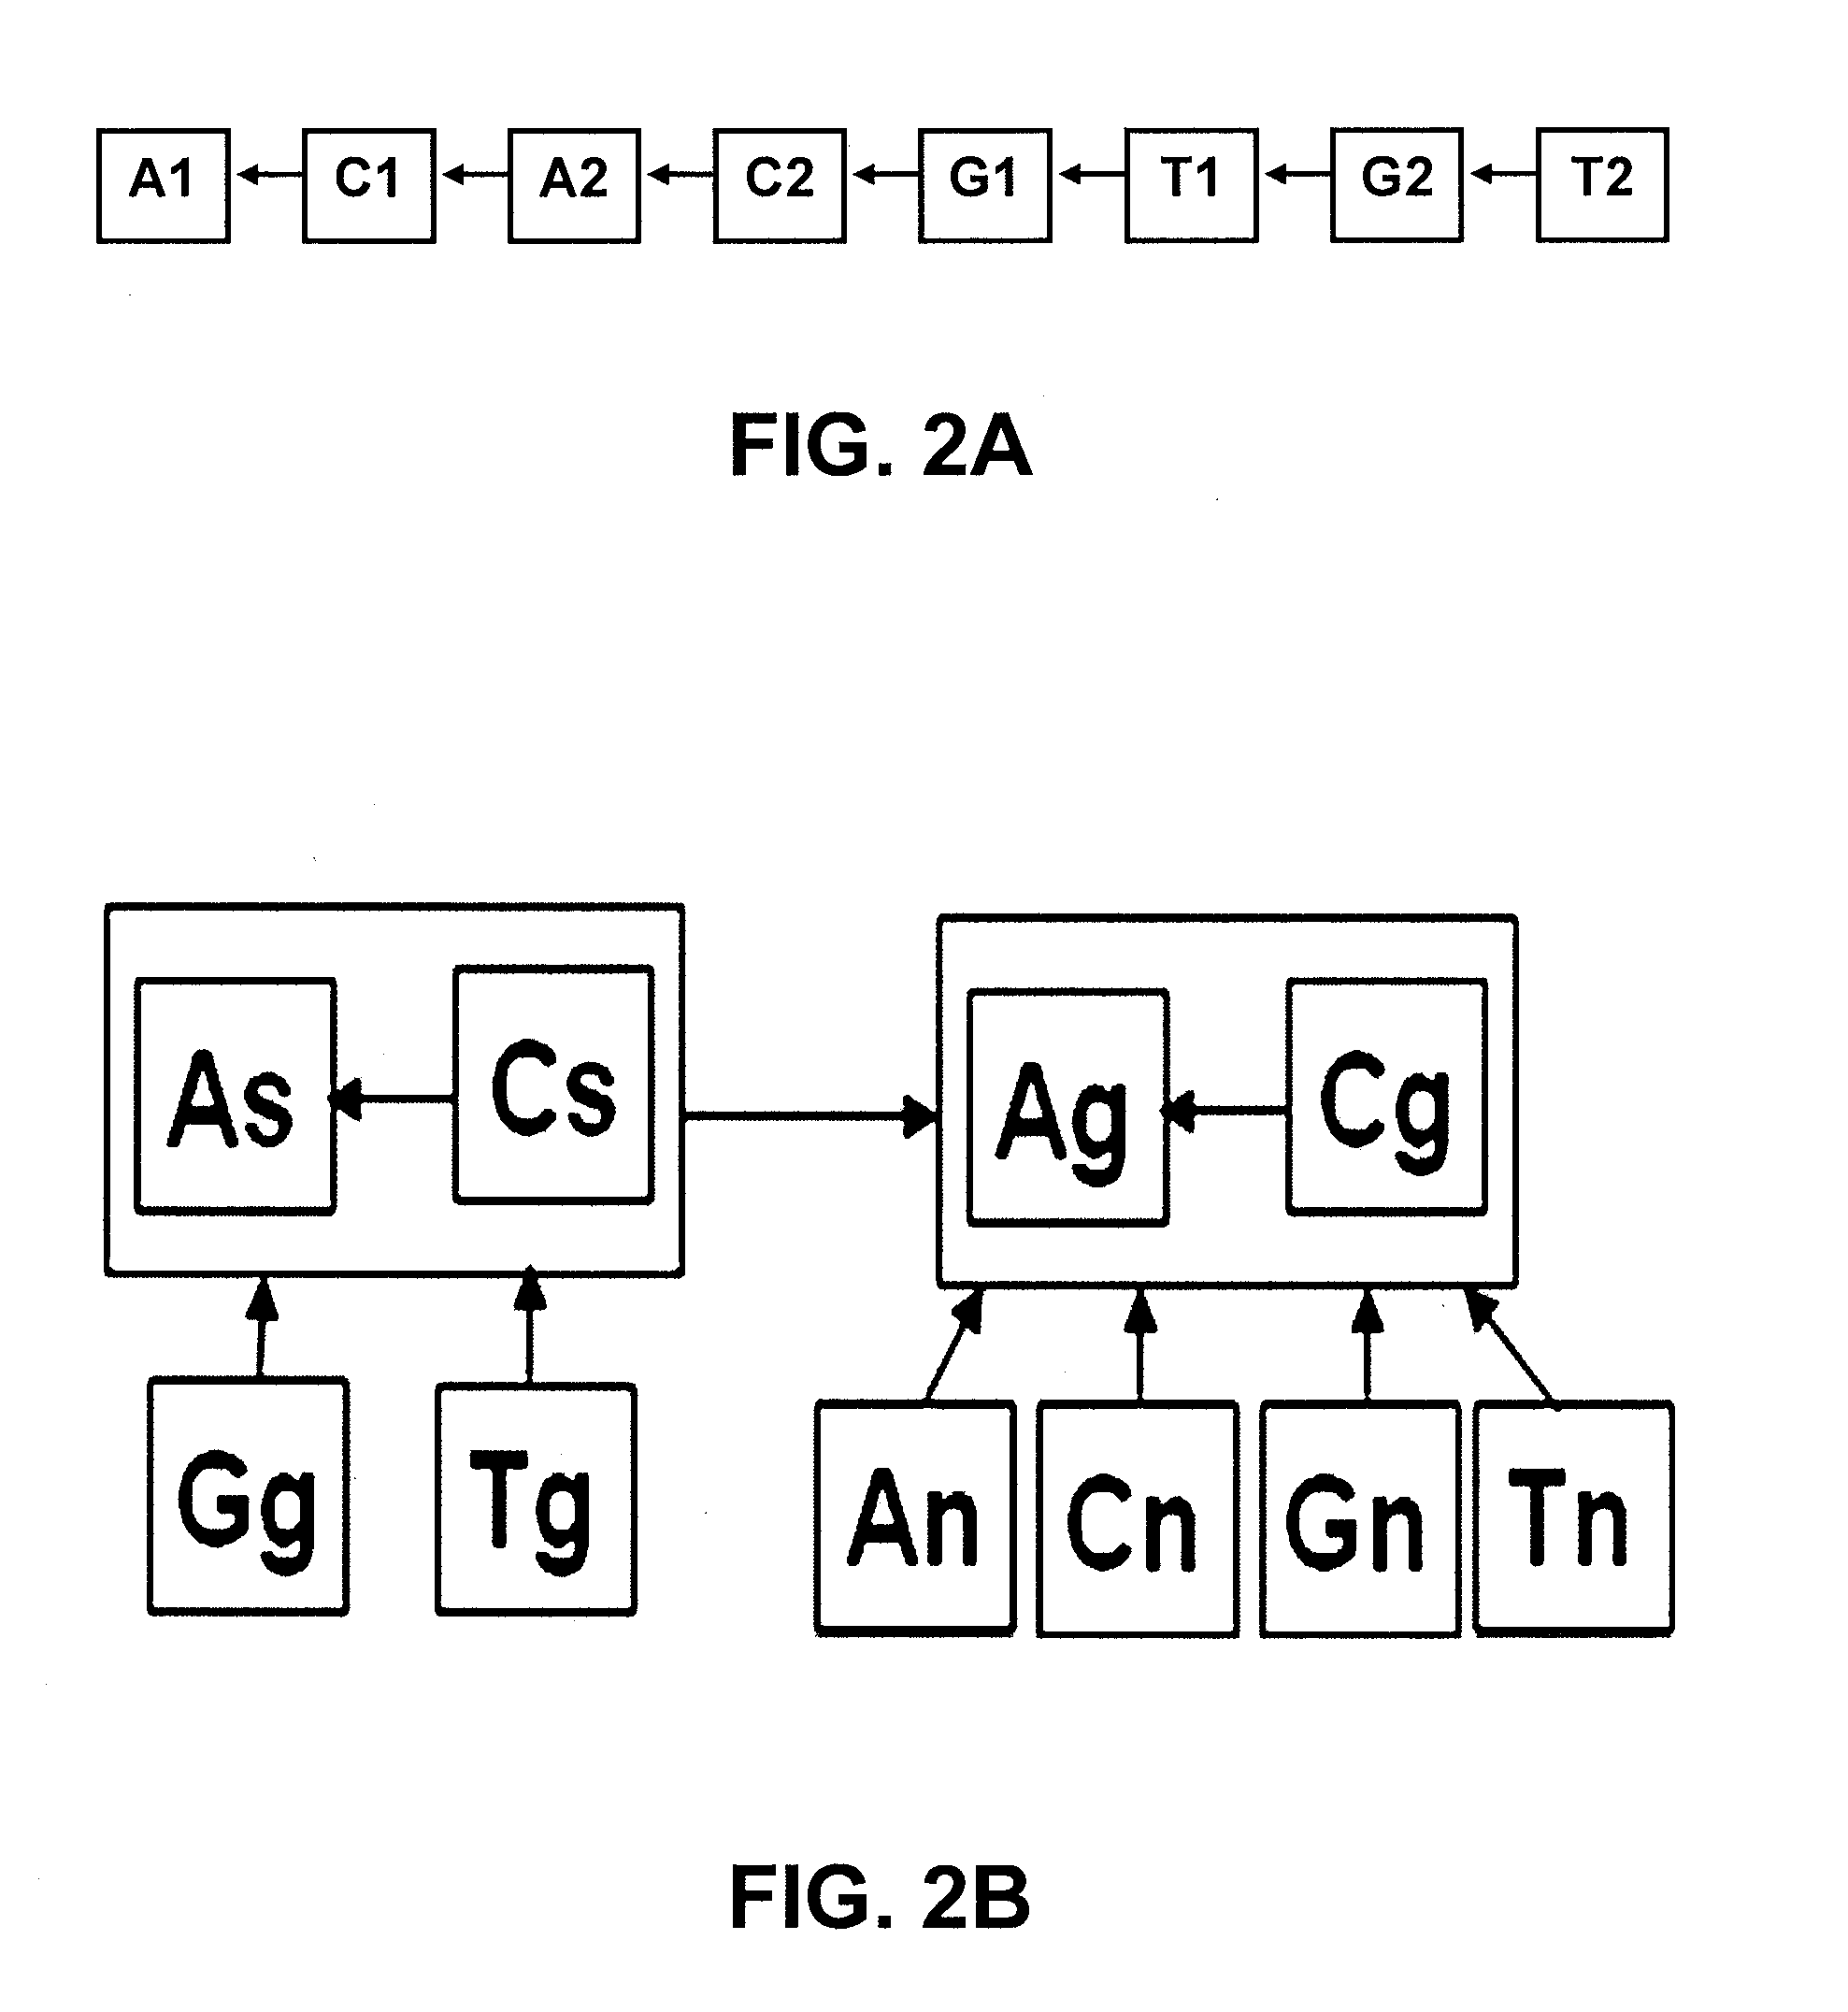 Data processing system and methods